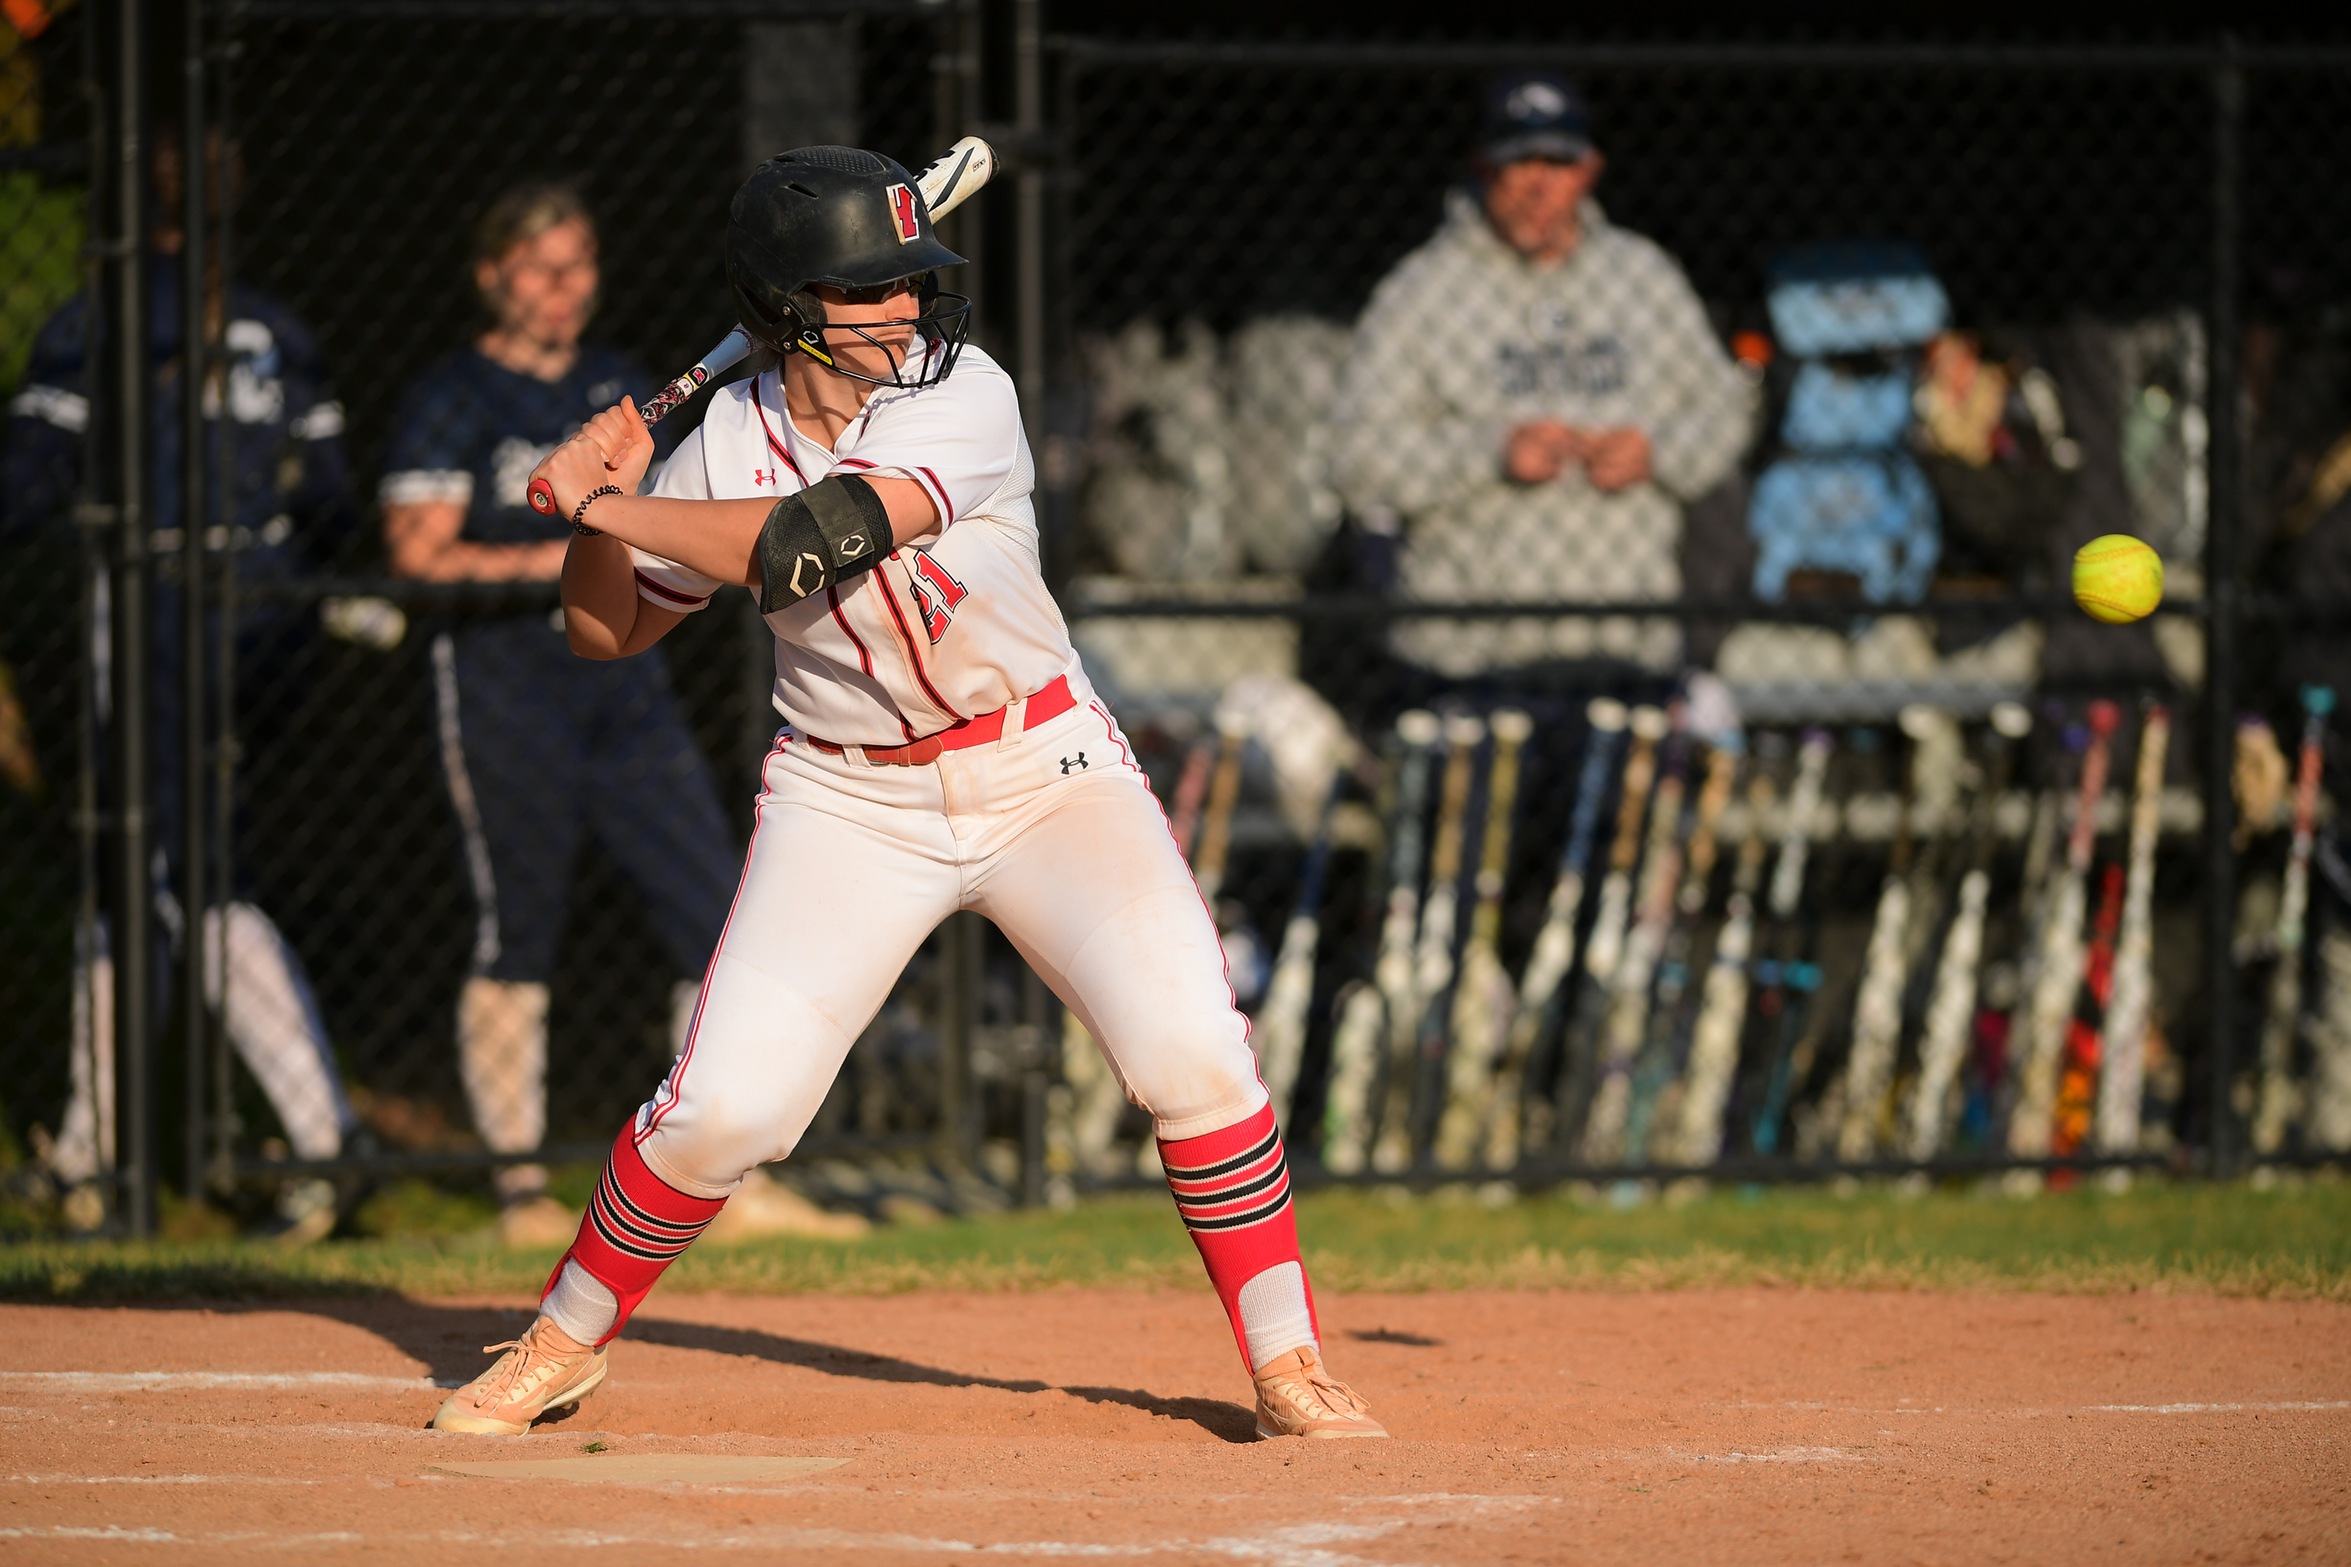 Softball Sweeps The Day with Wins over Rockford, Pitt-Bradford